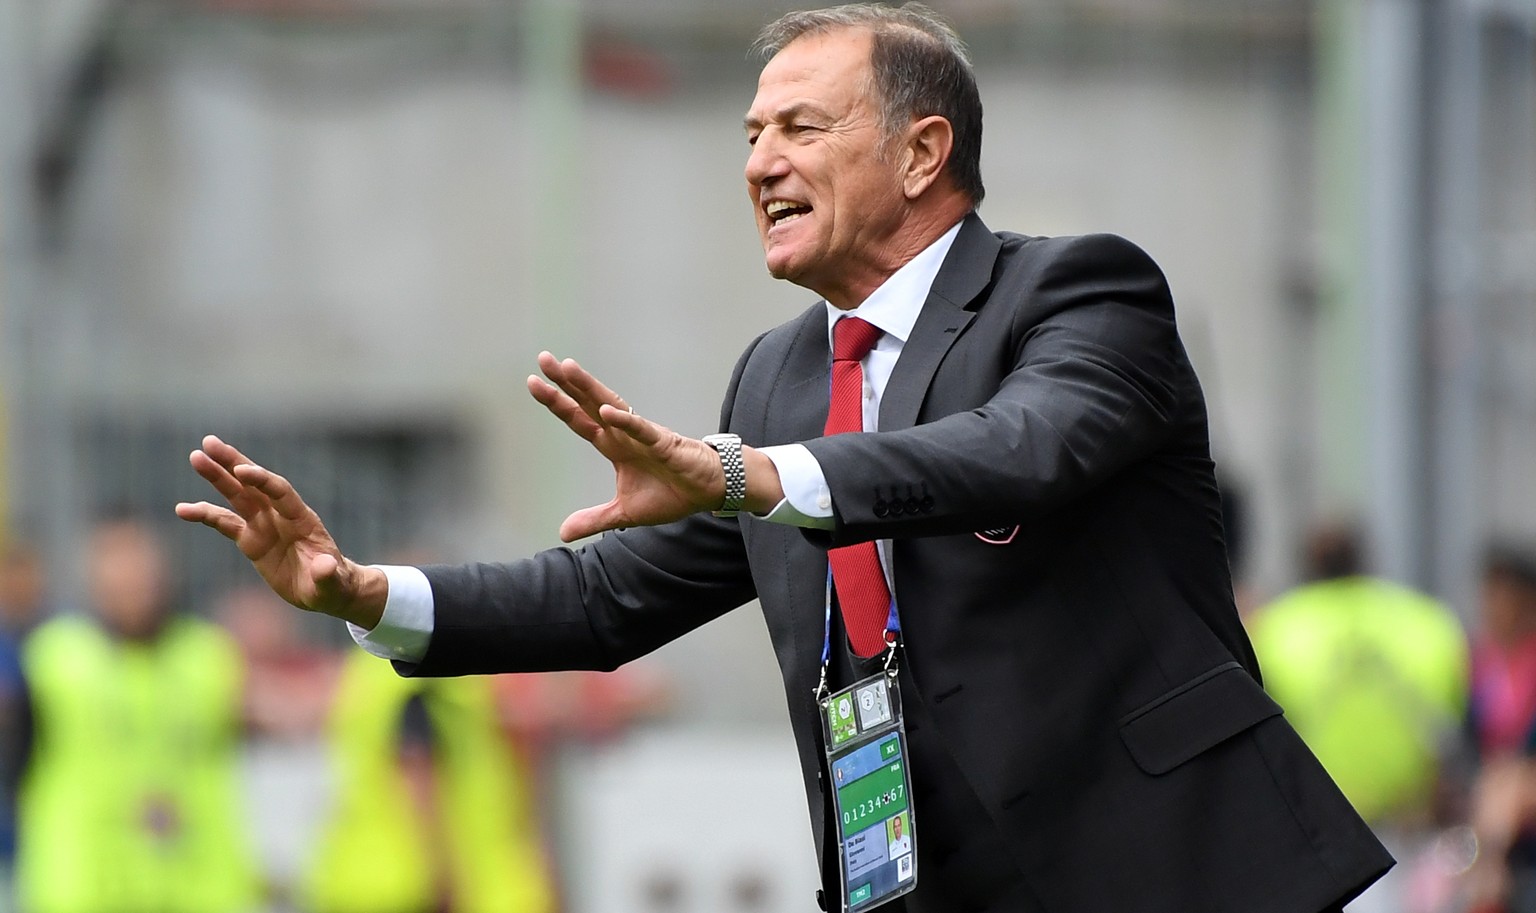 Albania coach Gianni De Biasi gestures during the Euro 2016 Group A soccer match between Albania and Switzerland, at the Bollaert stadium in Lens, France, Saturday, June 11, 2016. (AP Photo/Geert Vand ...